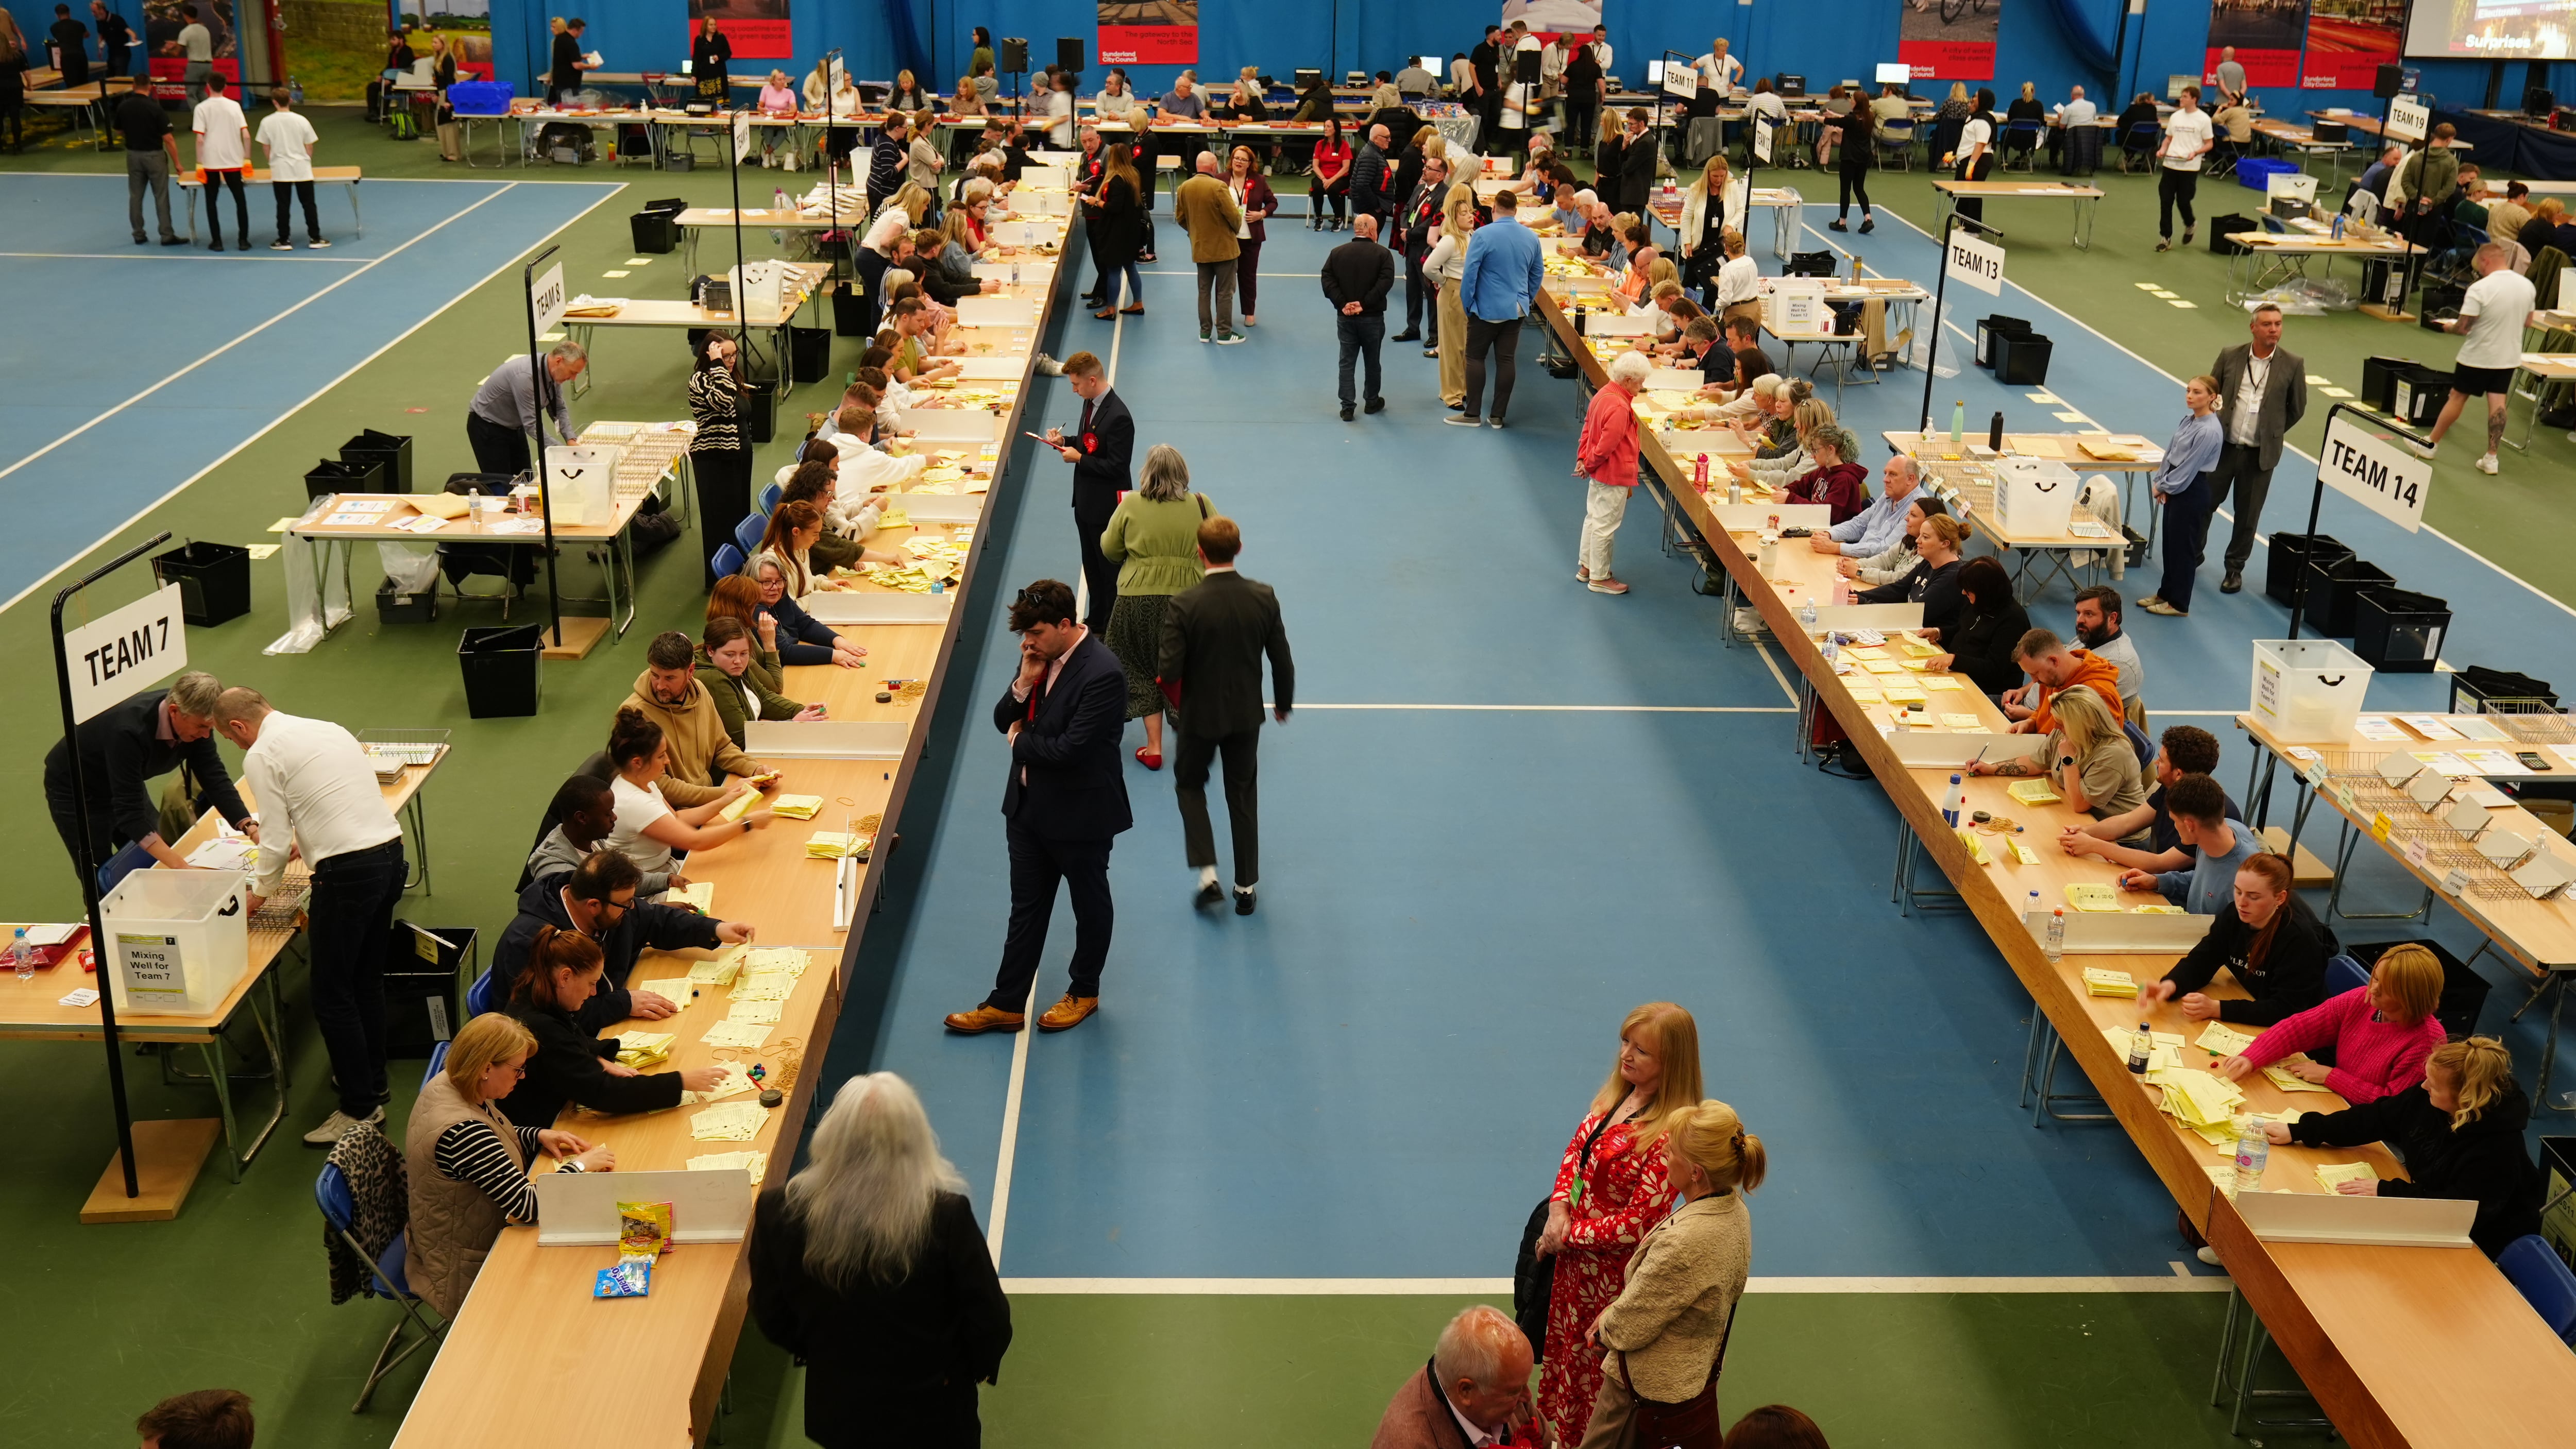 Votes are counted at Silkworth Community Pool Tennis & Wellness Centre in Sunderland